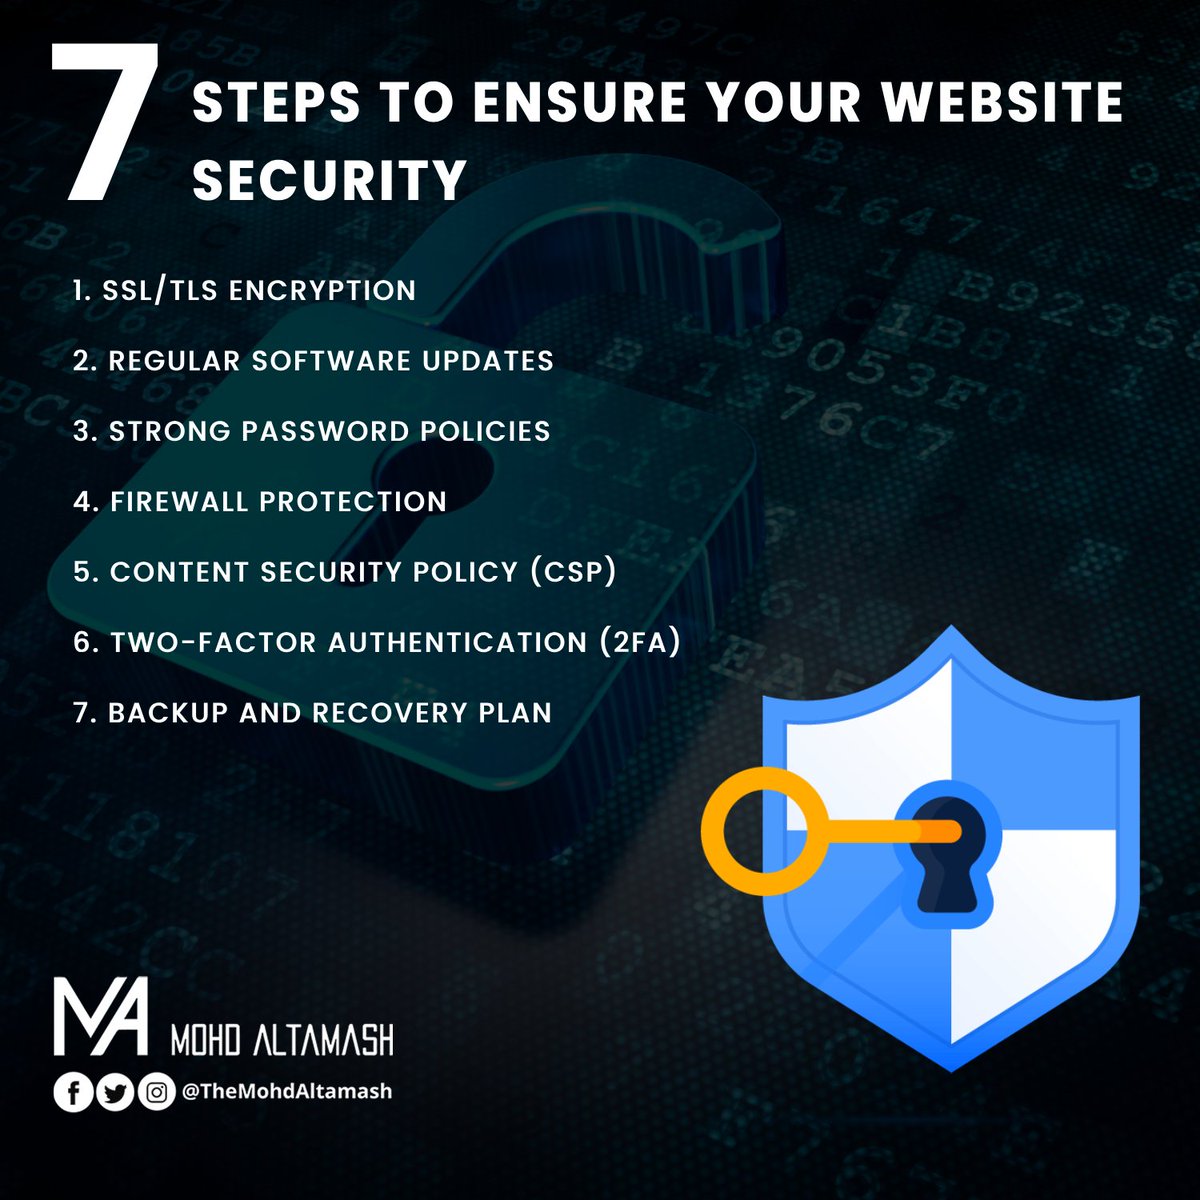 Secure your website with these 7 essential steps

#WebSecurity #SSL #SoftwareUpdates #StrongPasswords #FirewallProtection #CSP #2FA #BackupRecovery #OnlineSafety #TheMohdAltamash